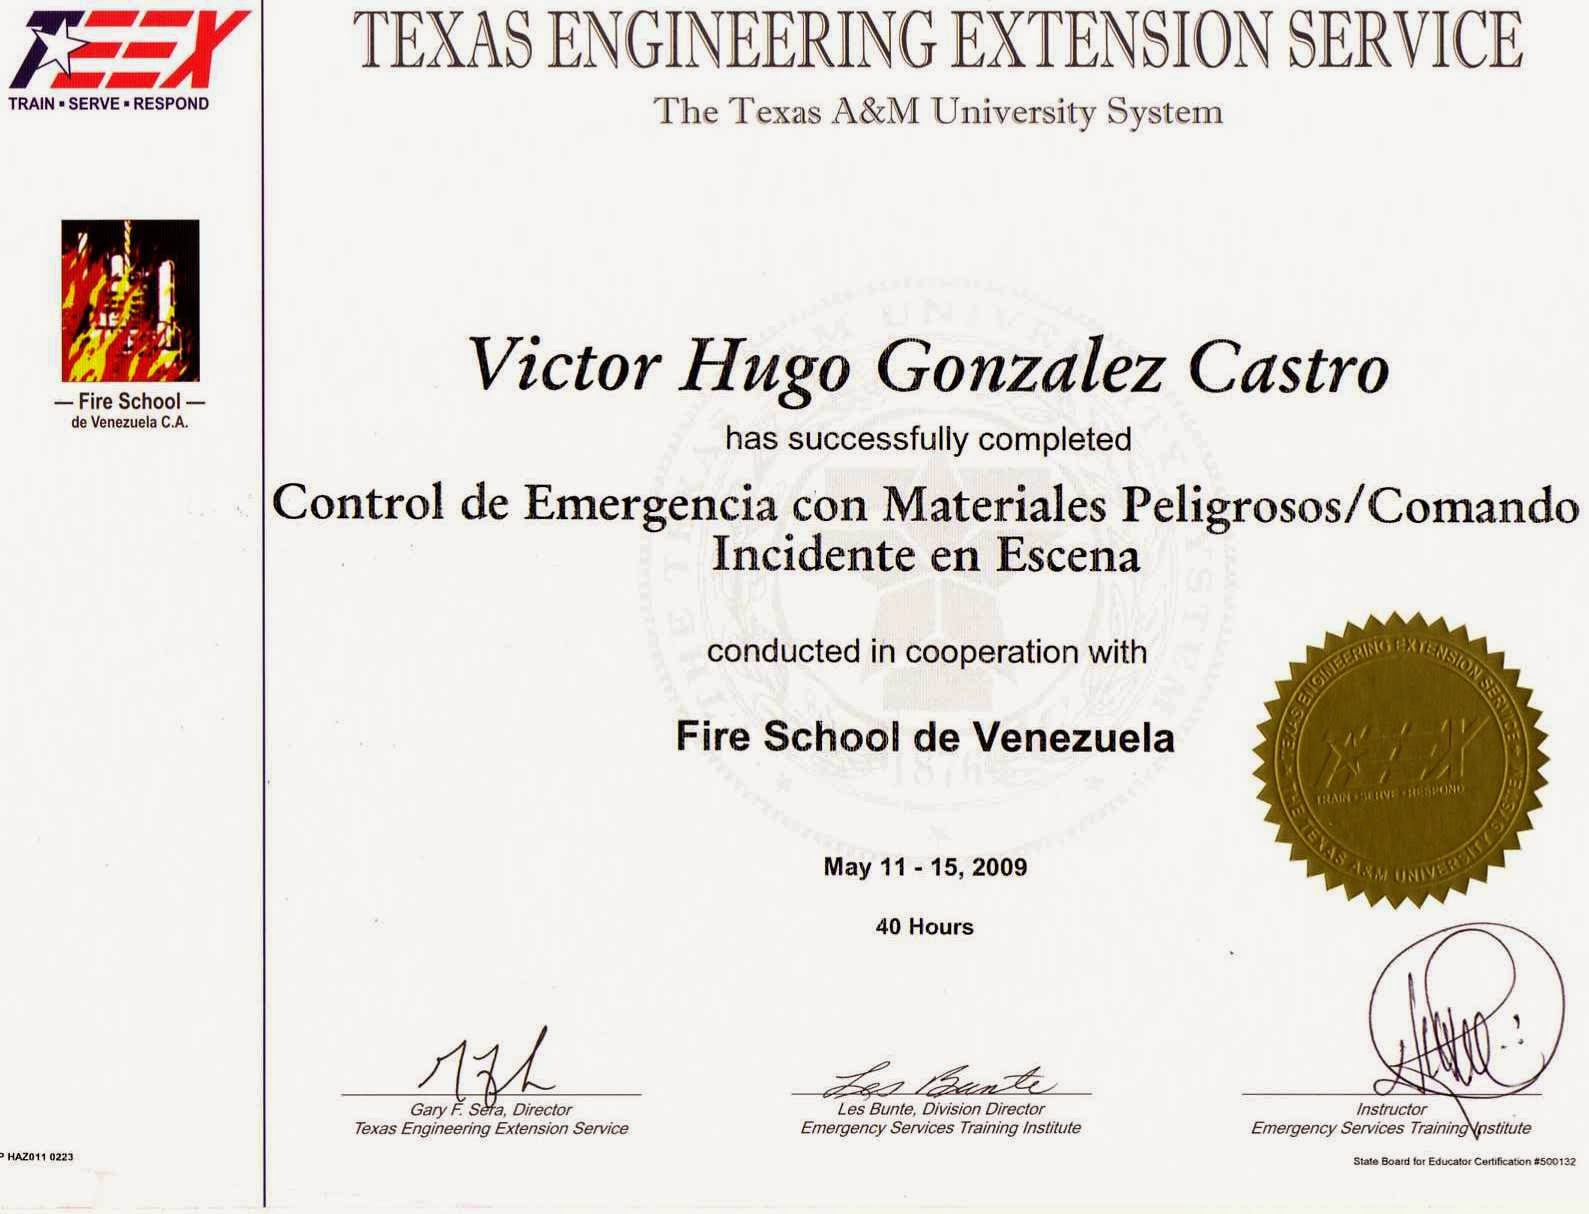 TEXAS ENGINEERING EXTENSION SERVICE